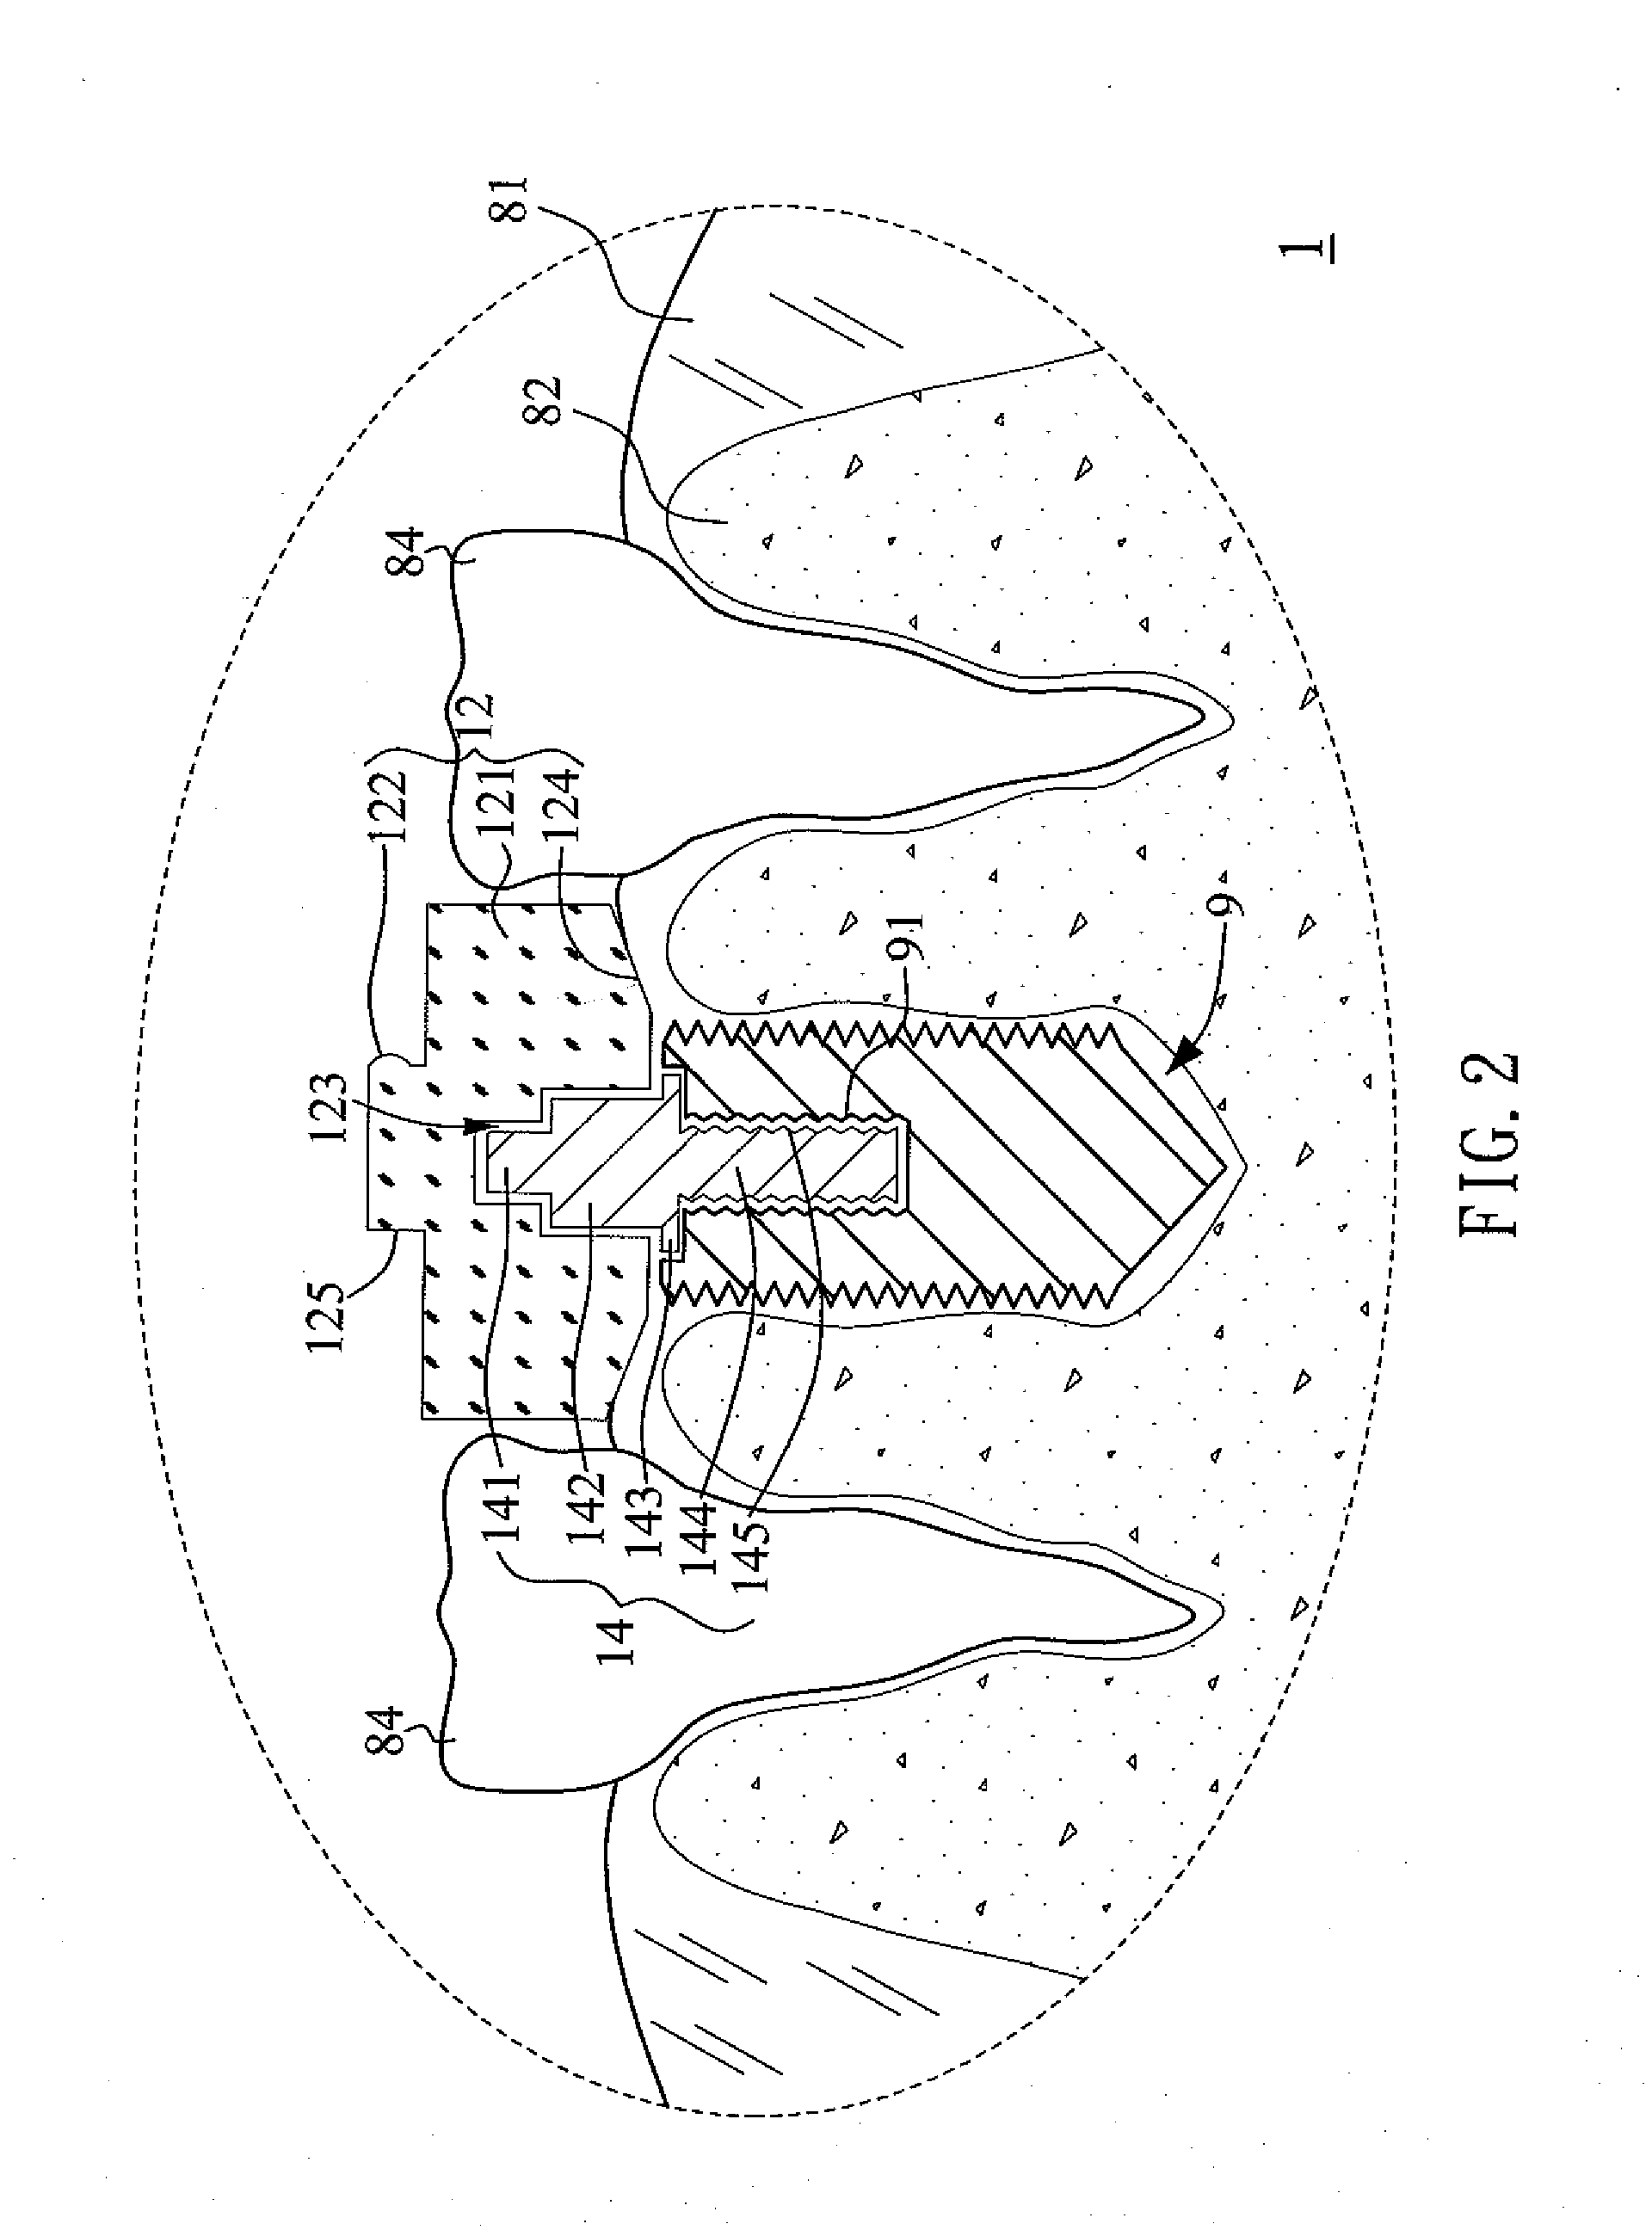 Multi Functional Implanting Suite and Implanting Method Thereof